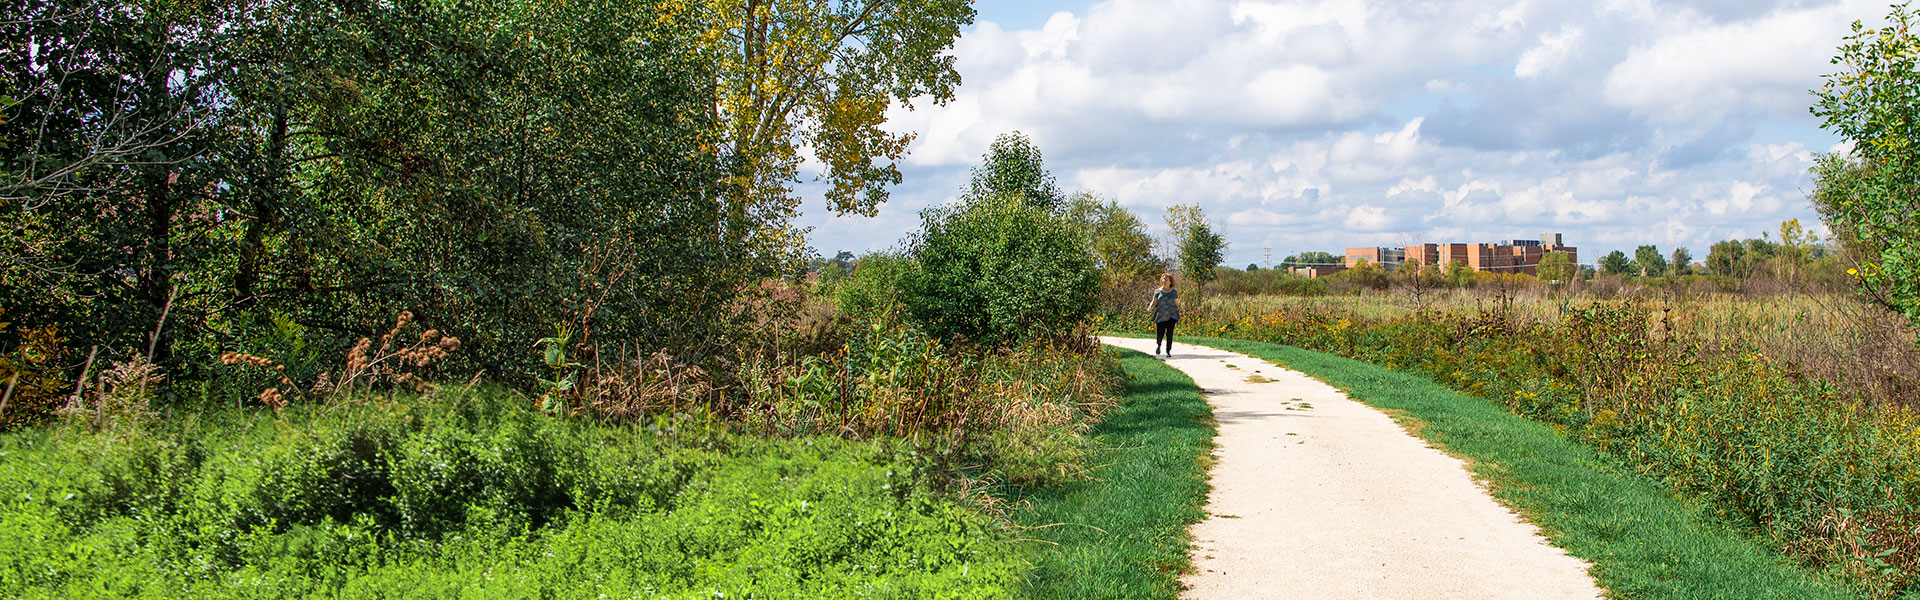 Picturesque nature path leading to the Grayslake CLC campus